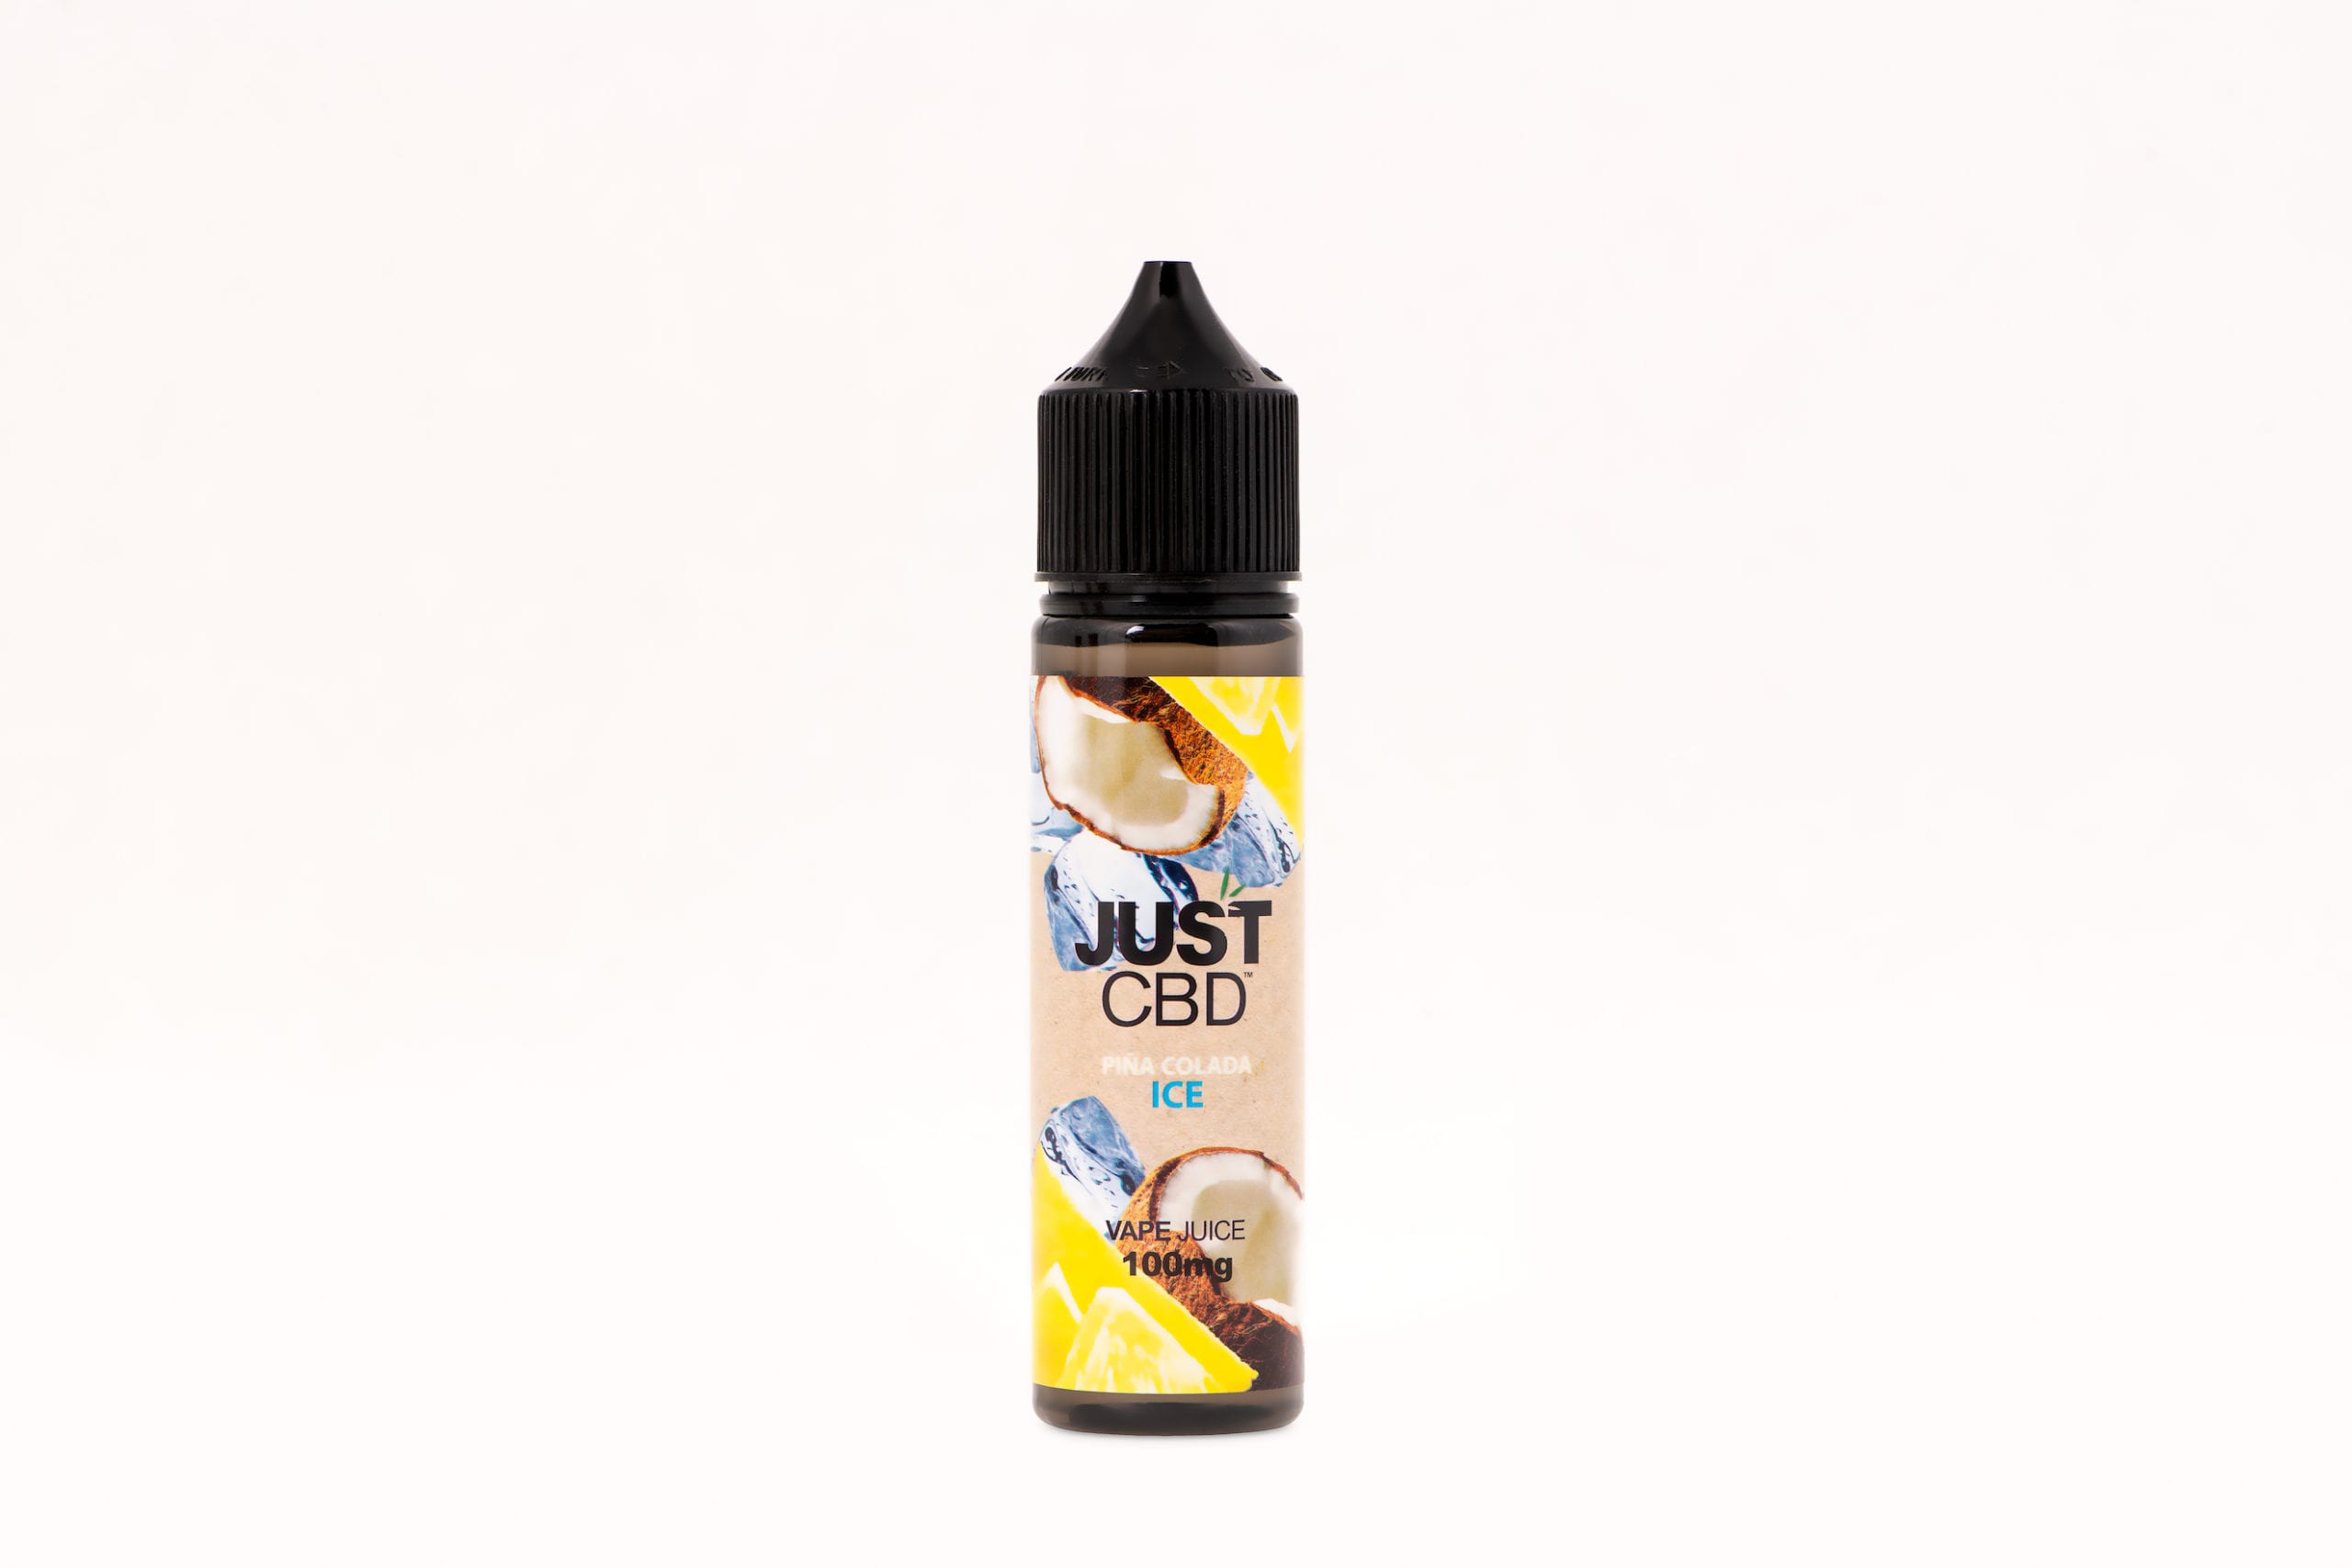 JustCBD Product Photography and Just CBD Products